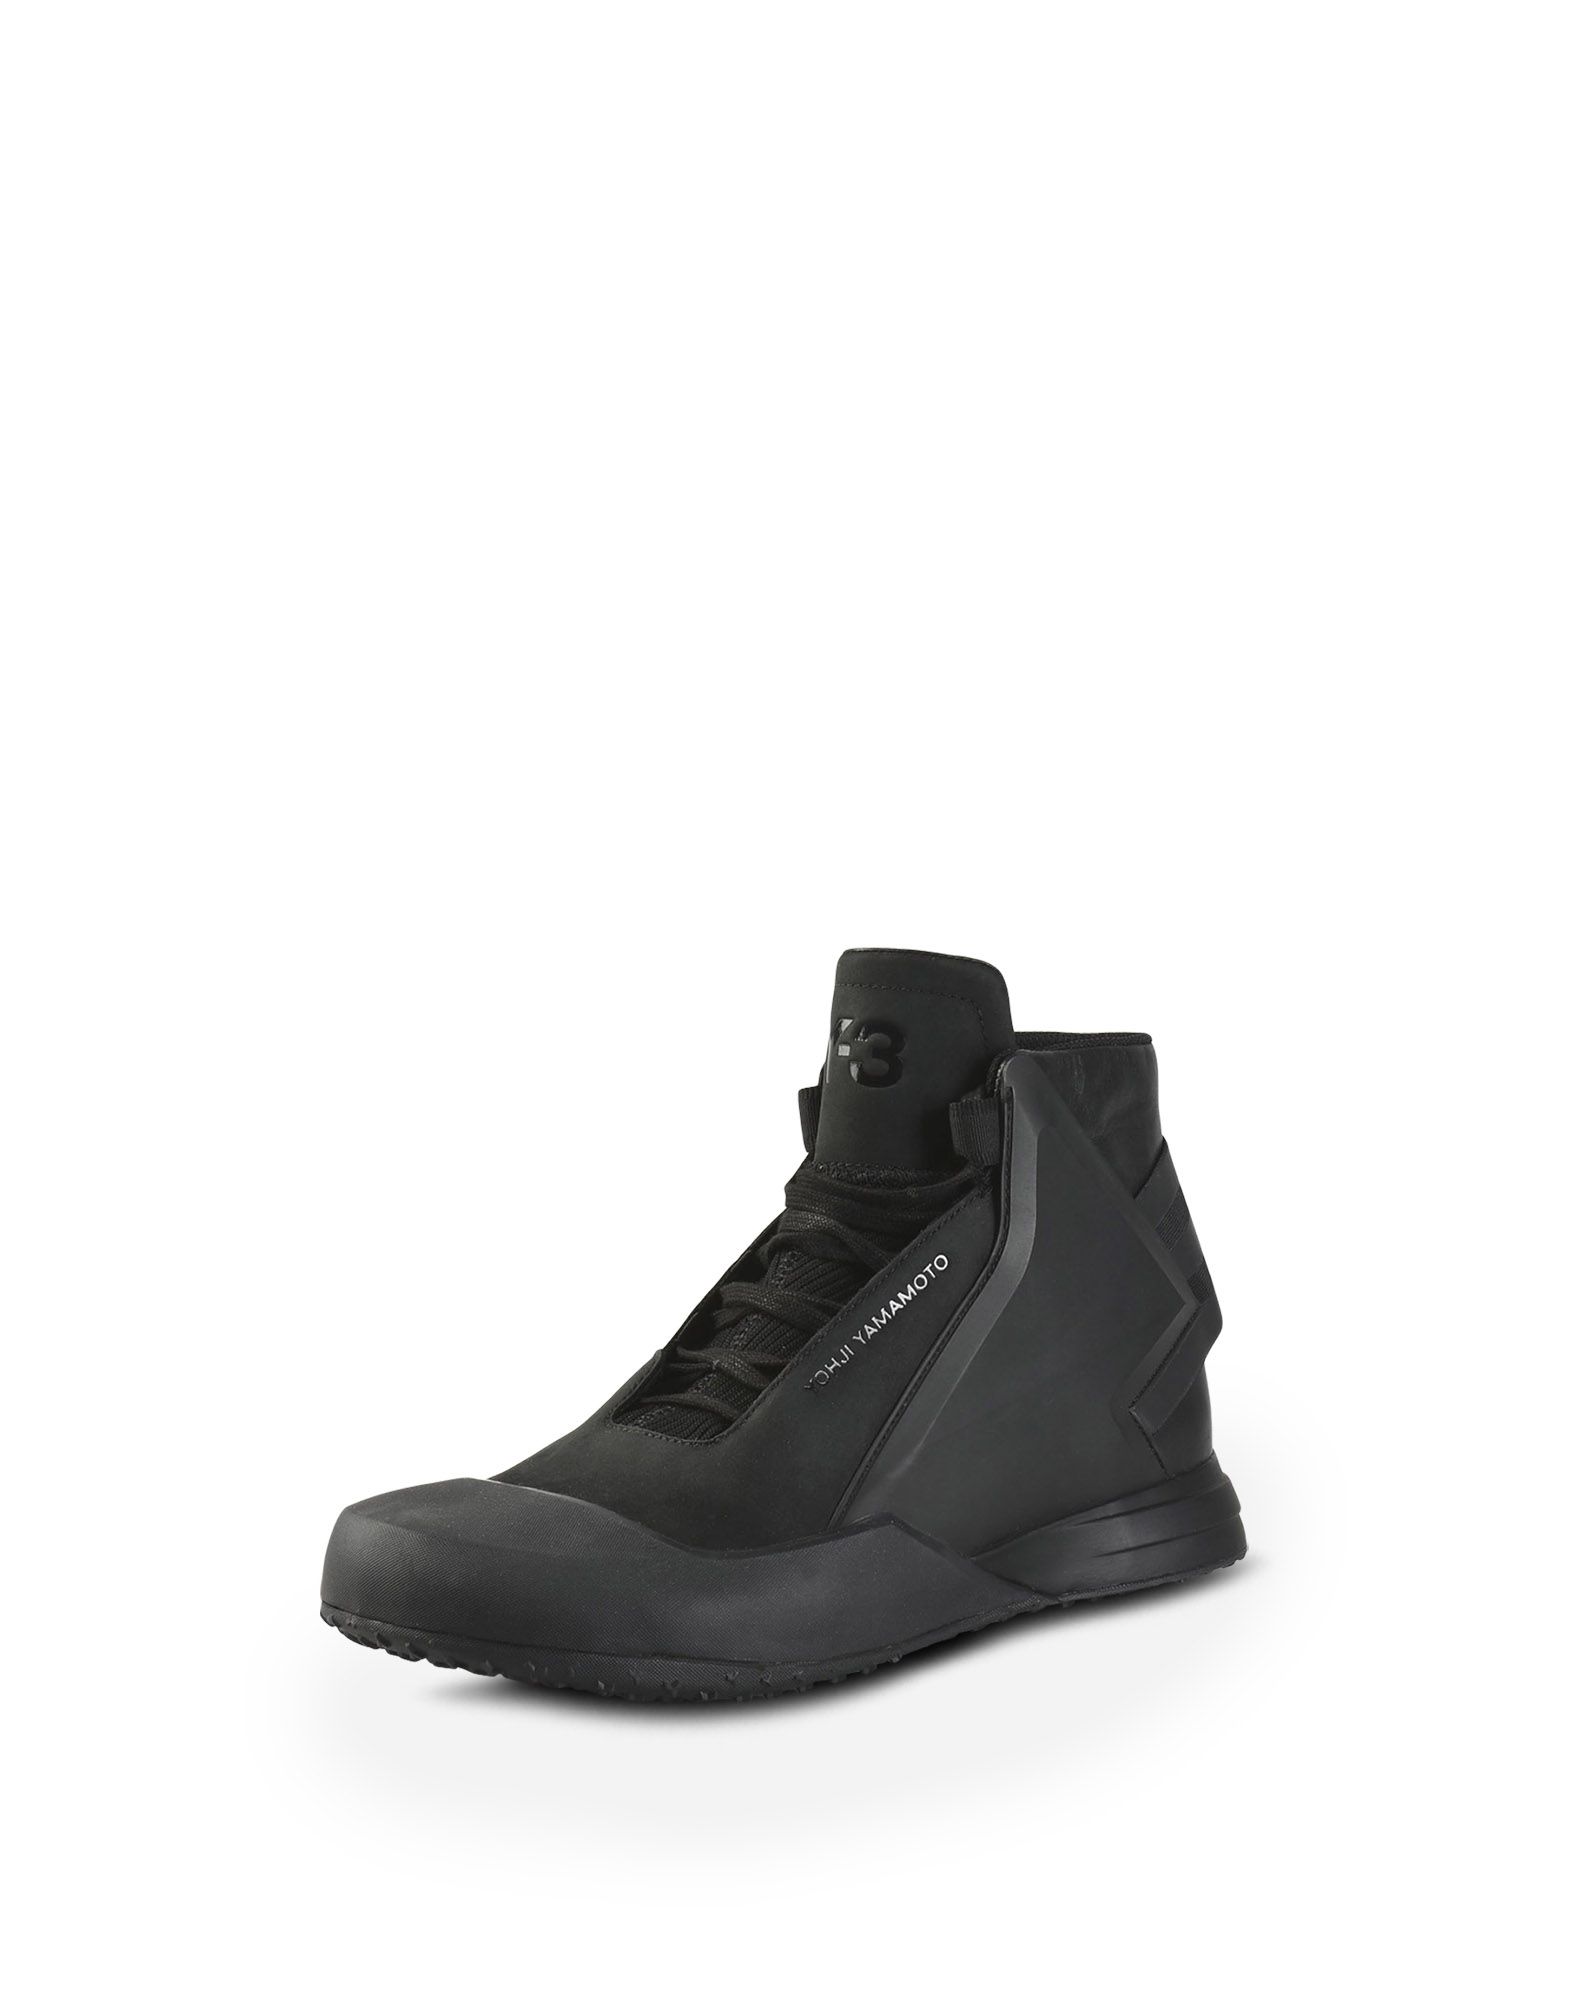 Y 3 BBALL TECH High Top Sneakers 